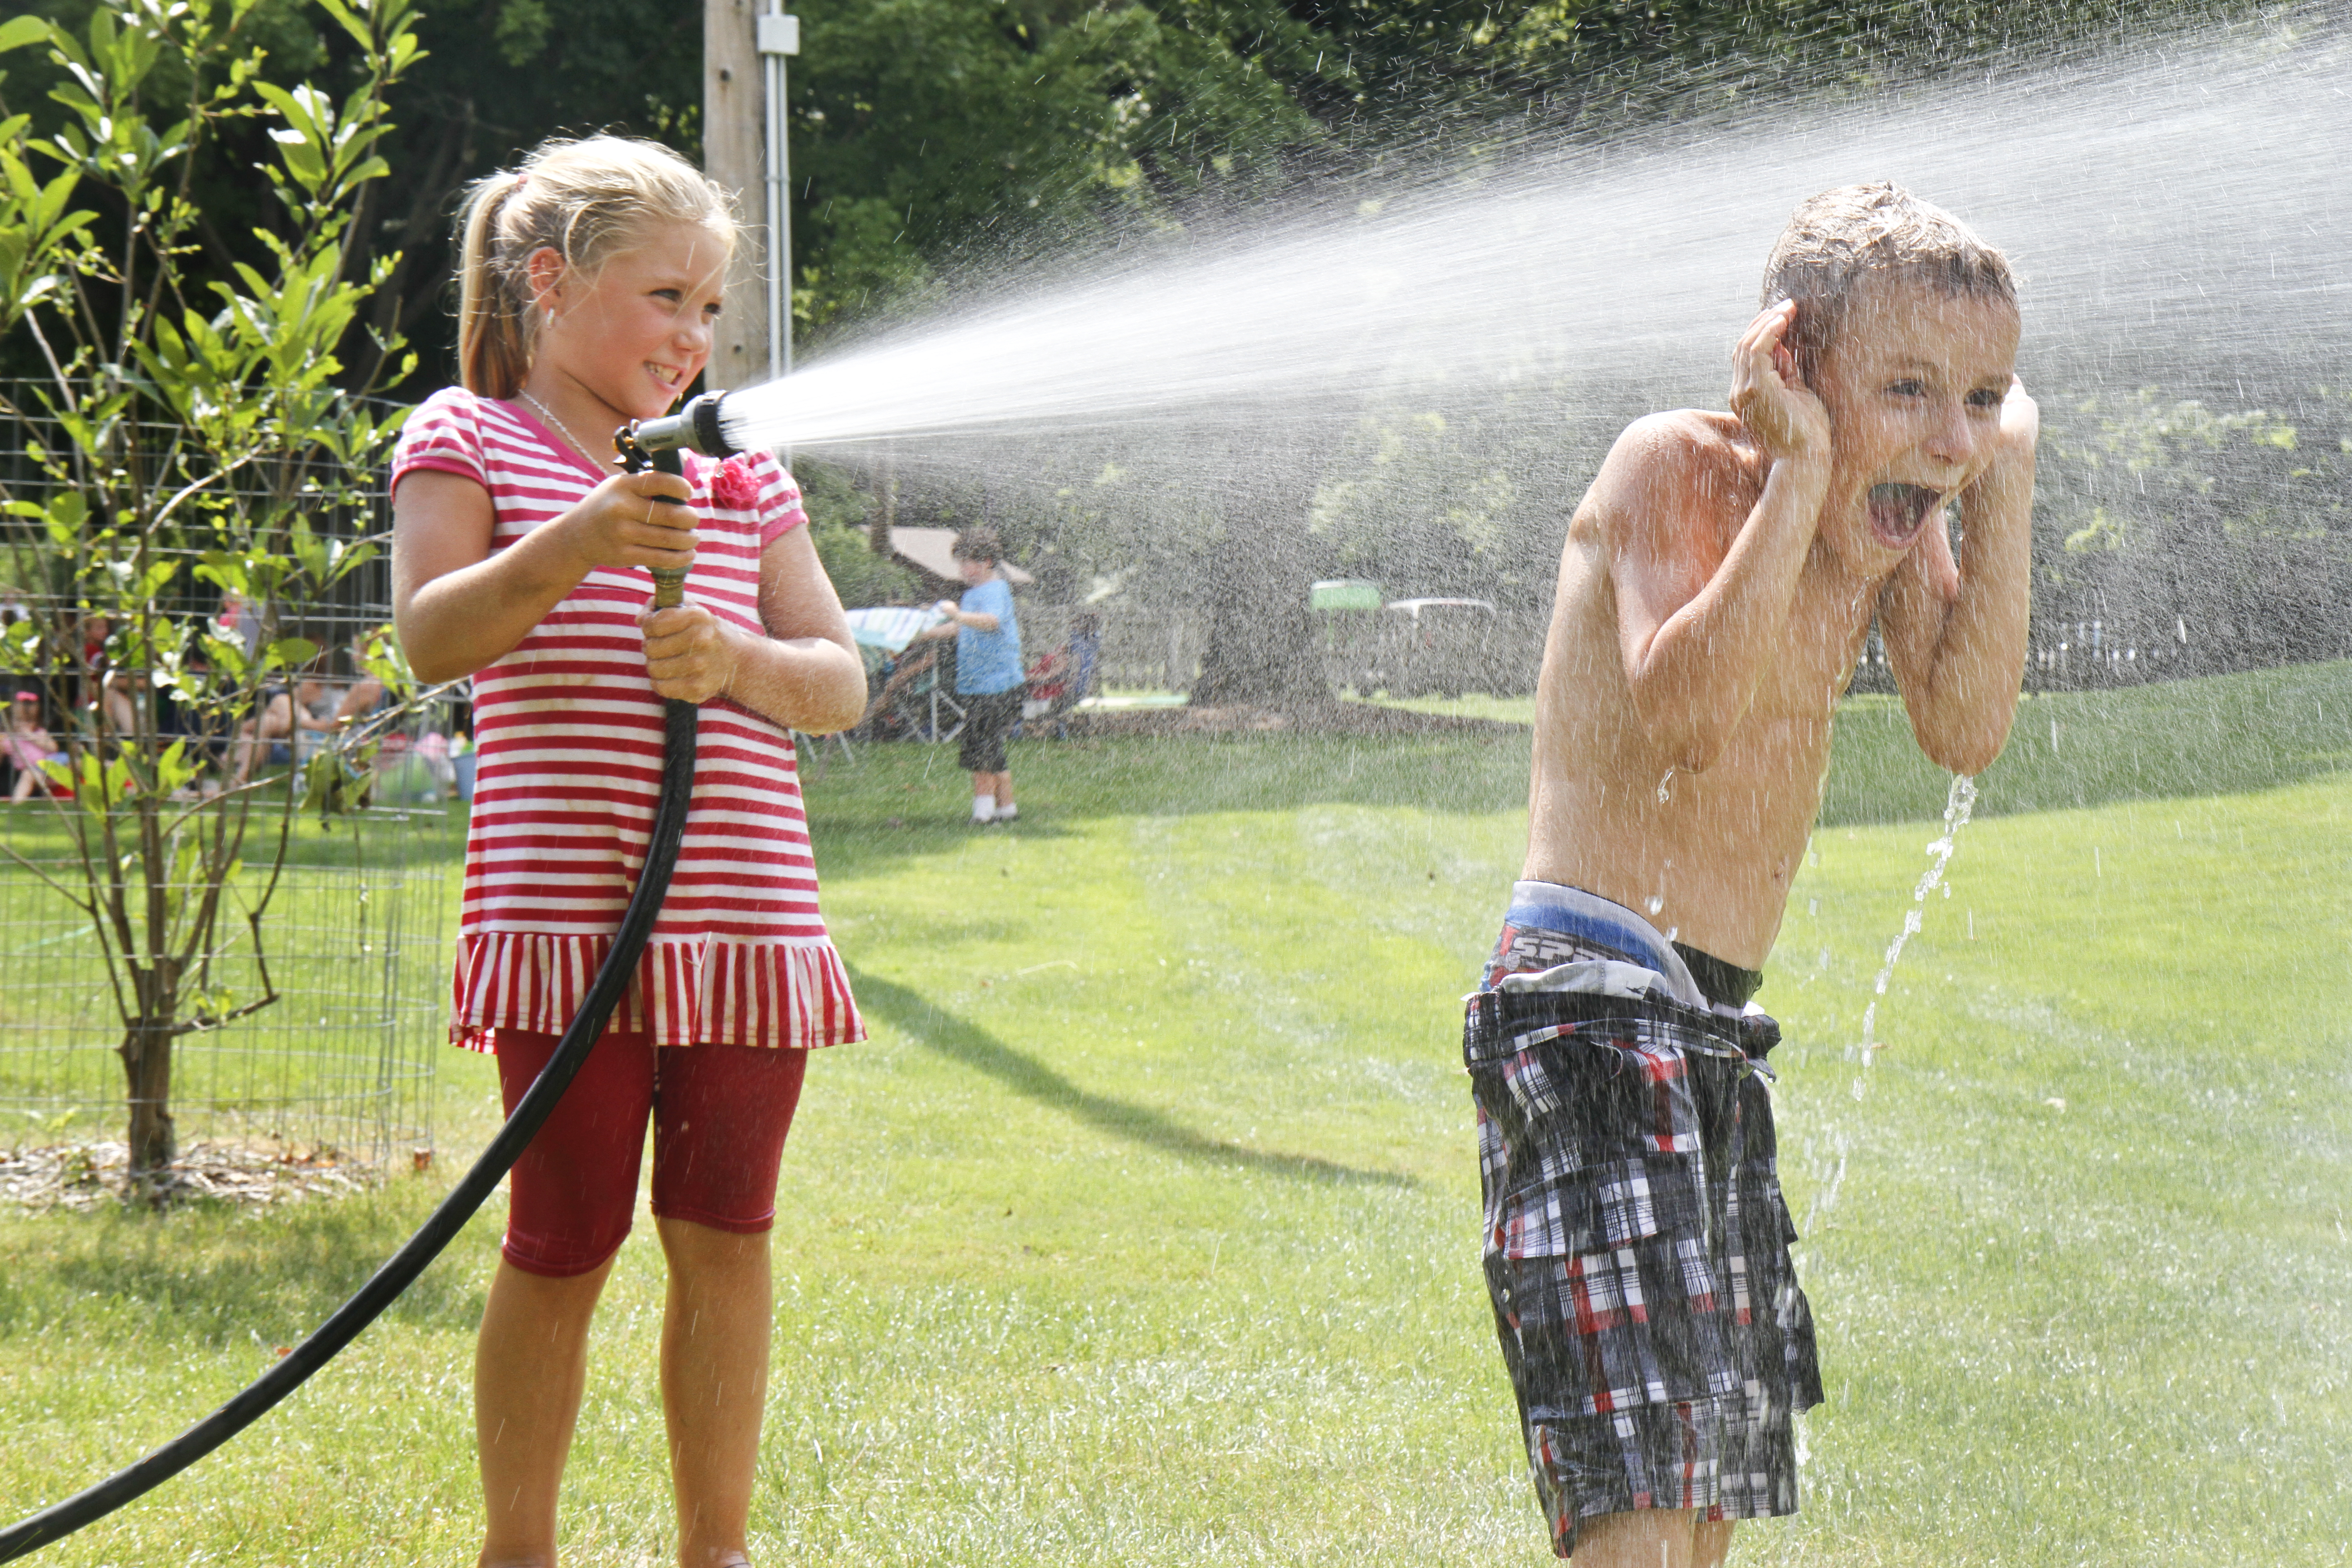 
Selena Rockenfelder, 7, sprays Stephen Strawderman, 6, with a hose at the sand sculpture contest at Mill Creek Park. Hoses and sand were provided for the participants. 